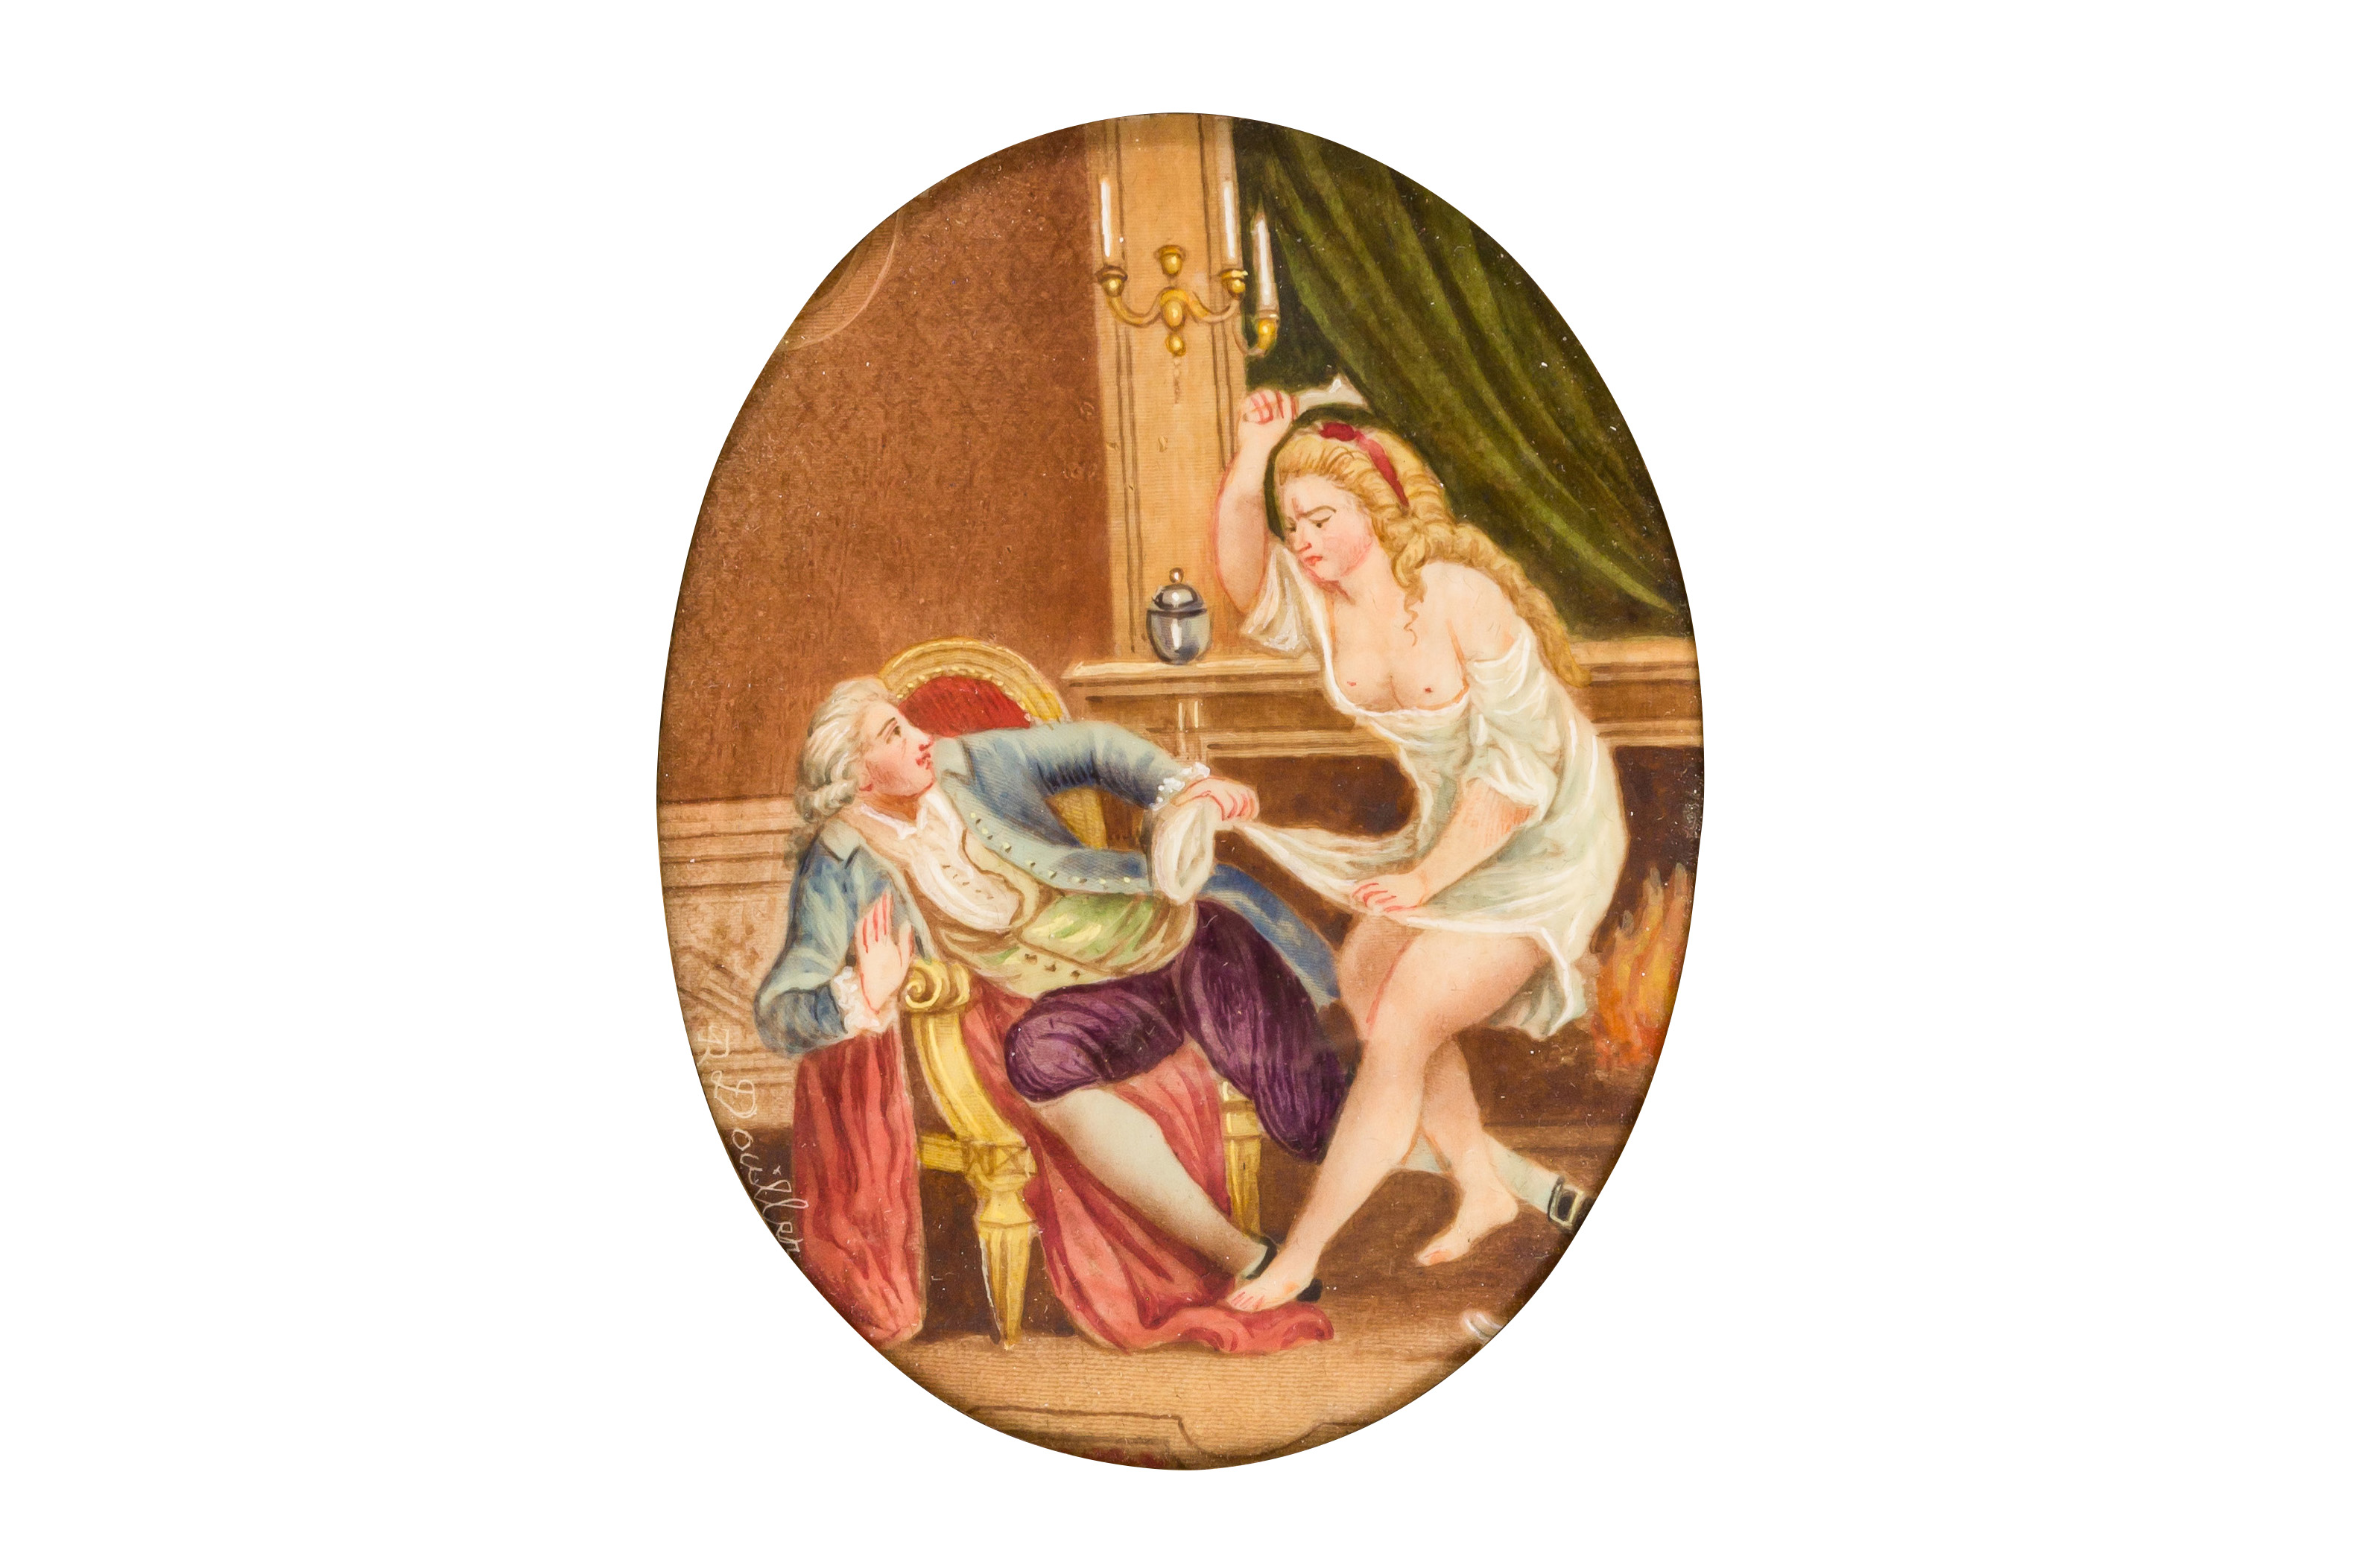 Y MINIATURE PAINTING WITH EROTIC SCENE - Image 2 of 2